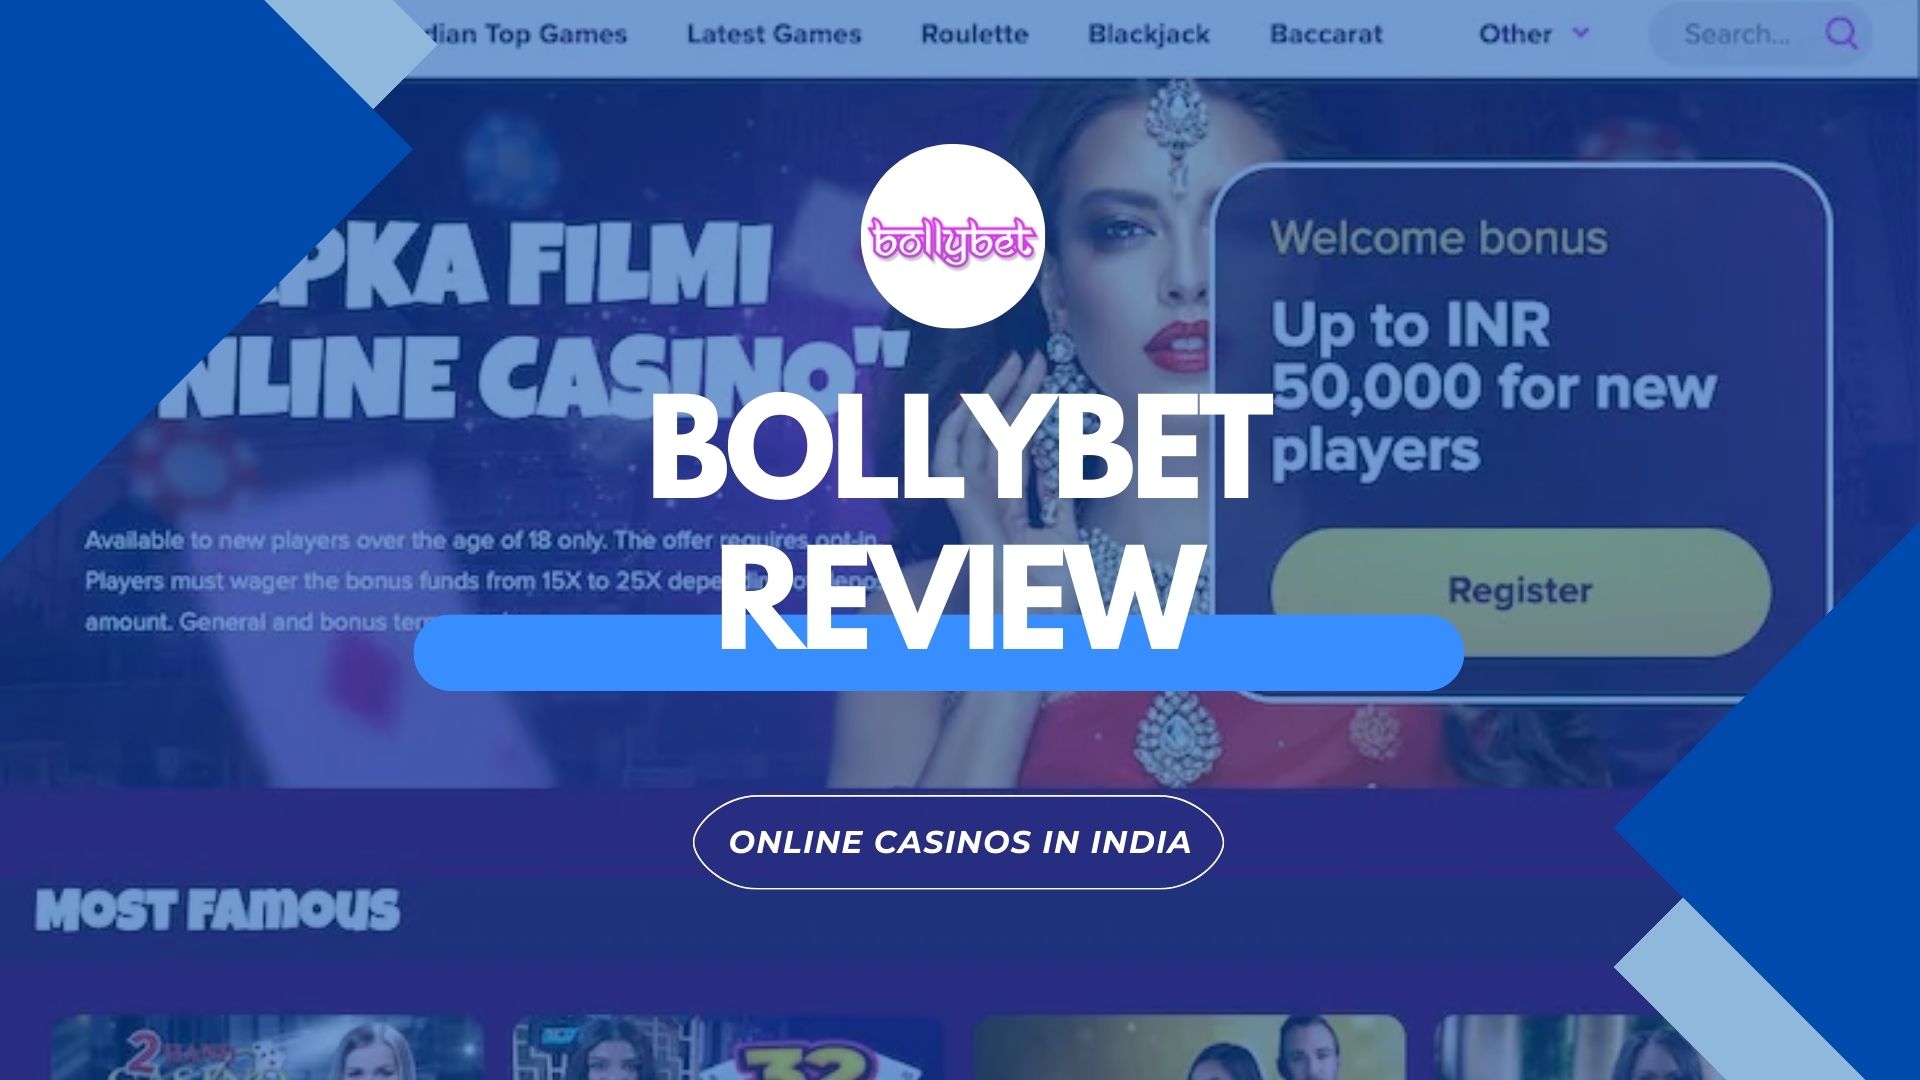 About BollyBet